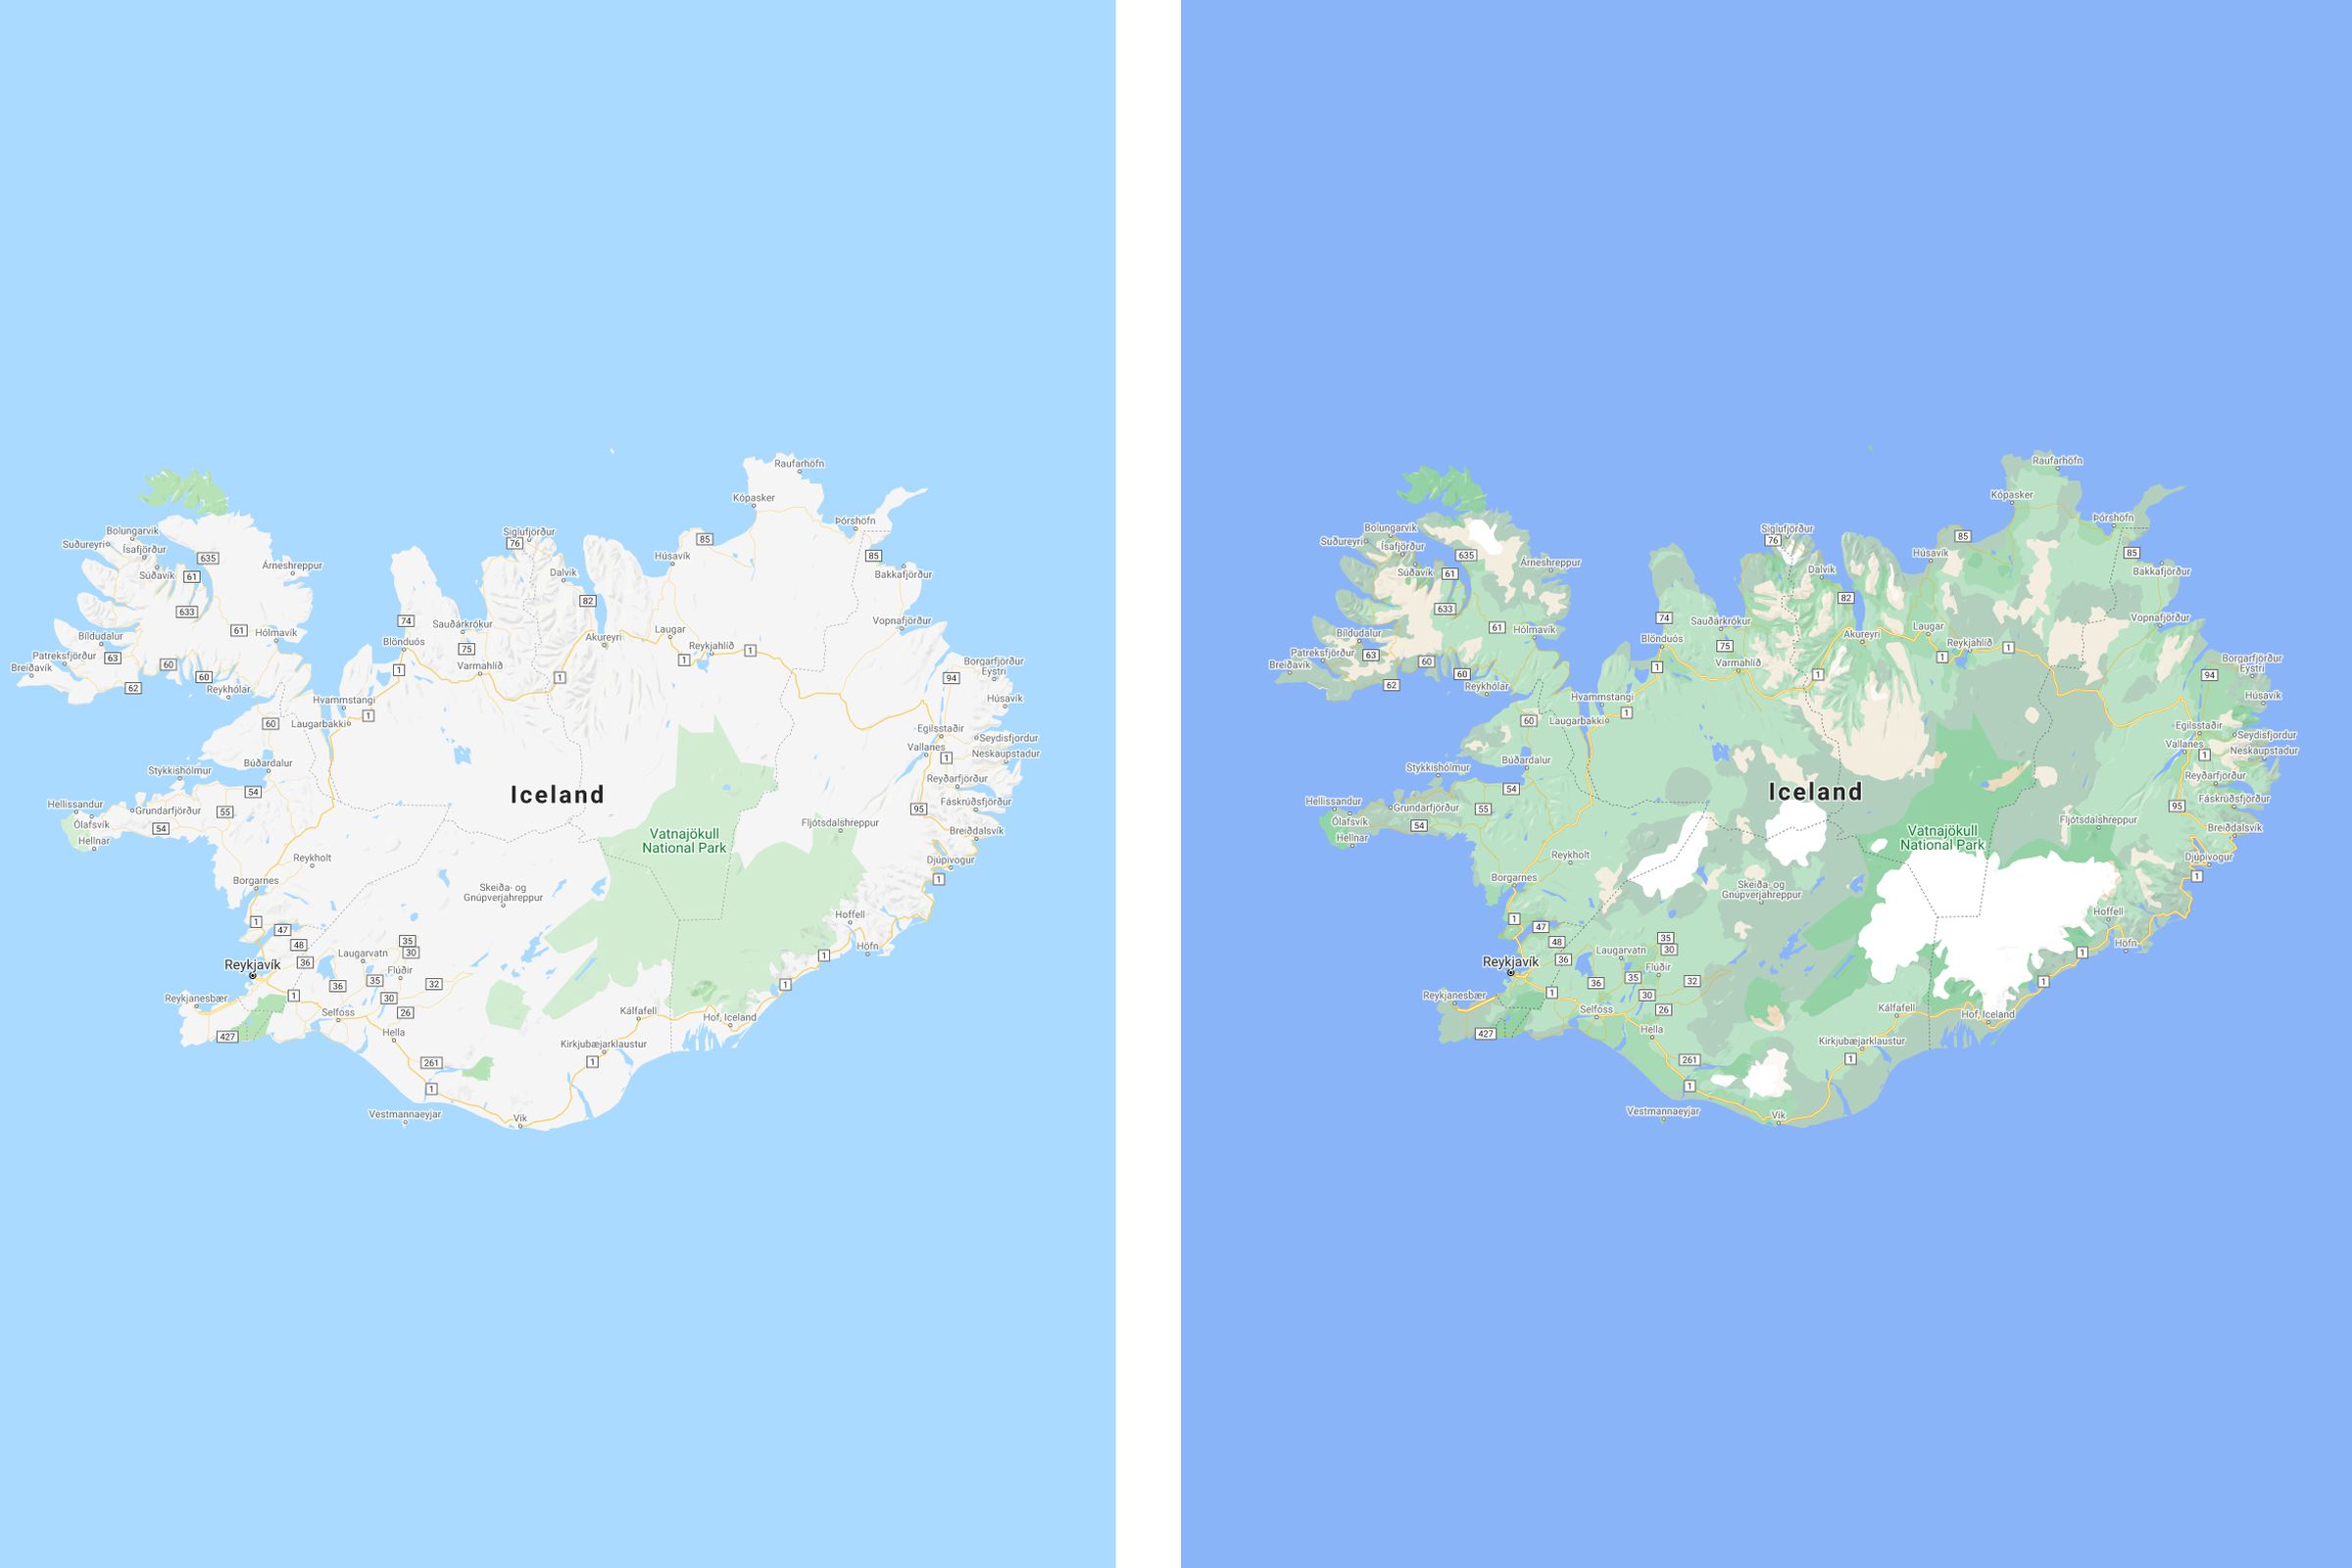 The new map design (right) does a better job at distinguishing between Iceland’s ice caps and greenery.